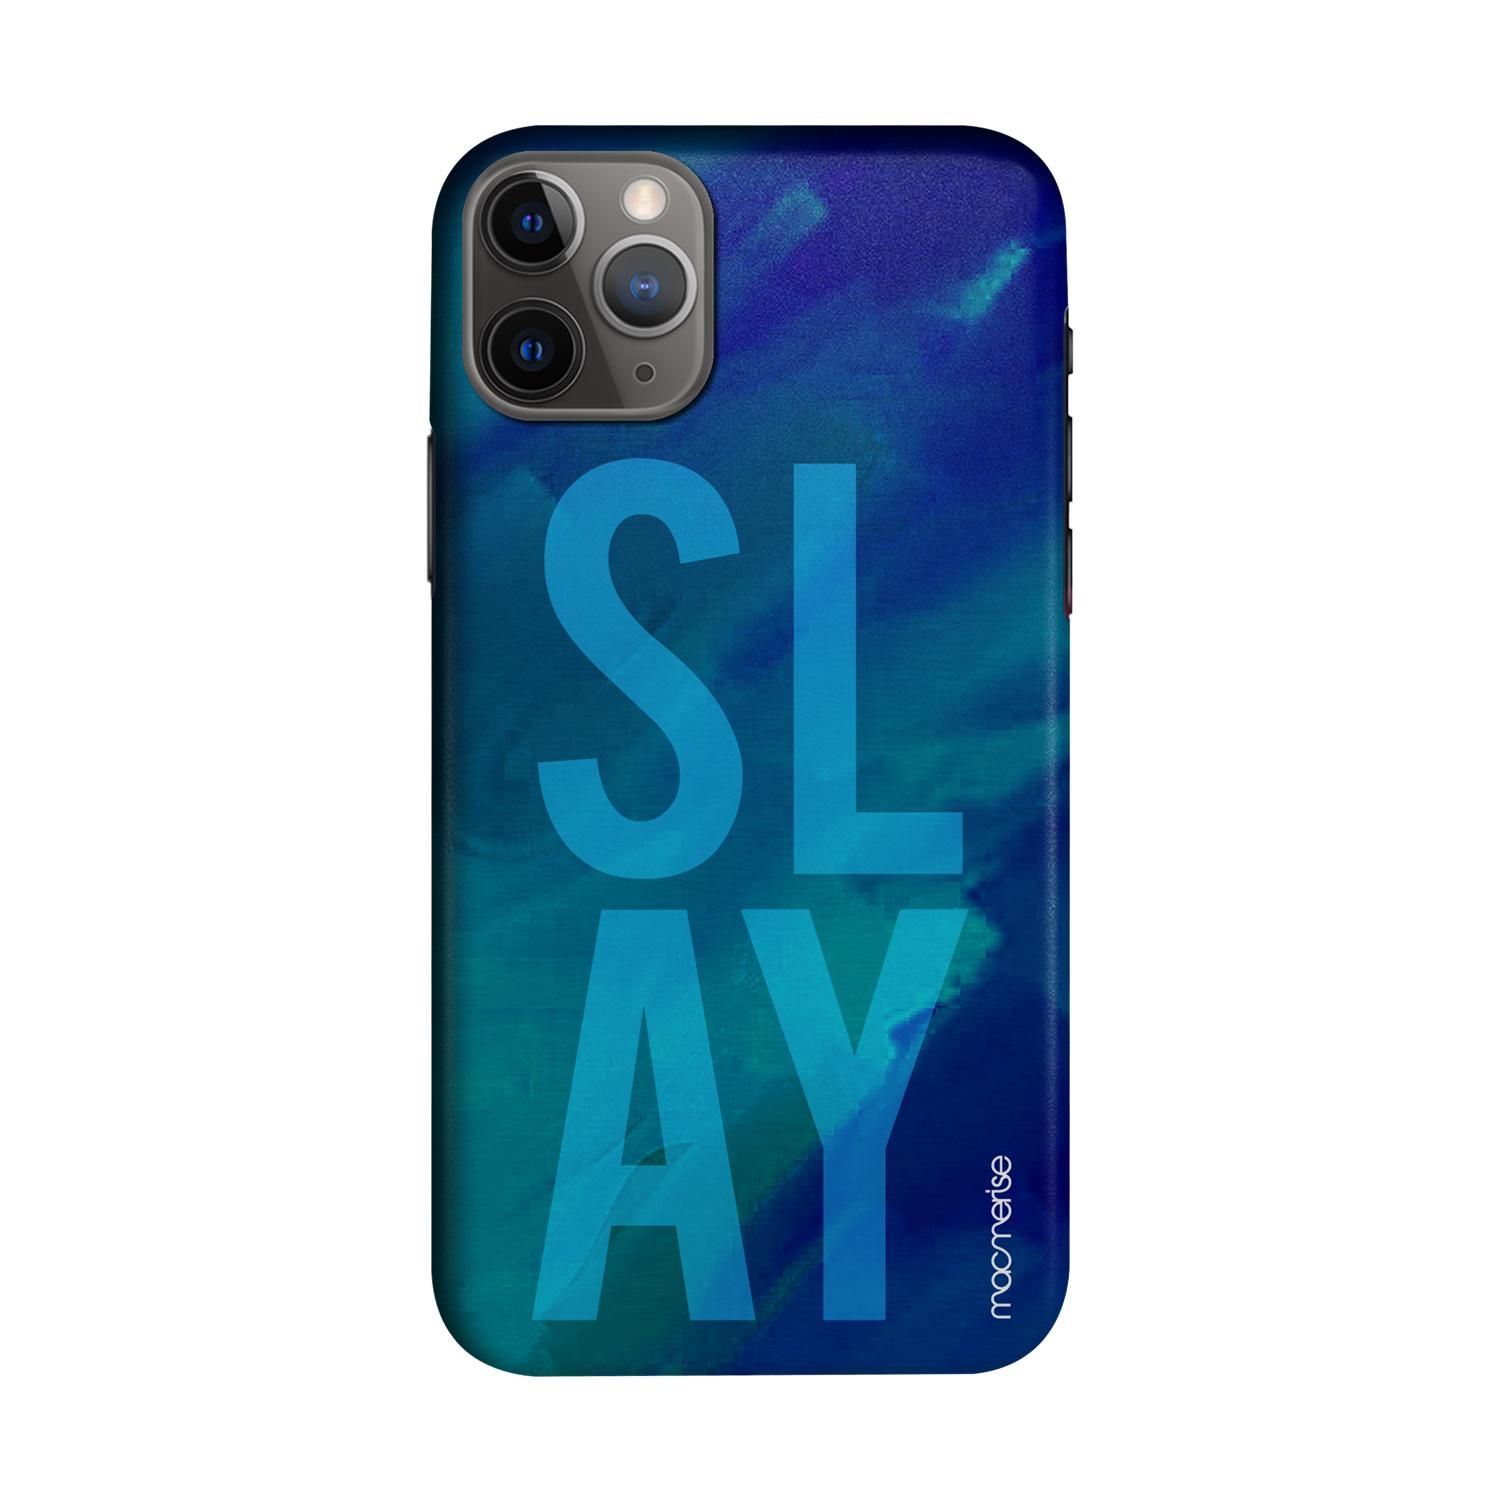 Buy Slay Blue - Sleek Phone Case for iPhone 11 Pro Max Online